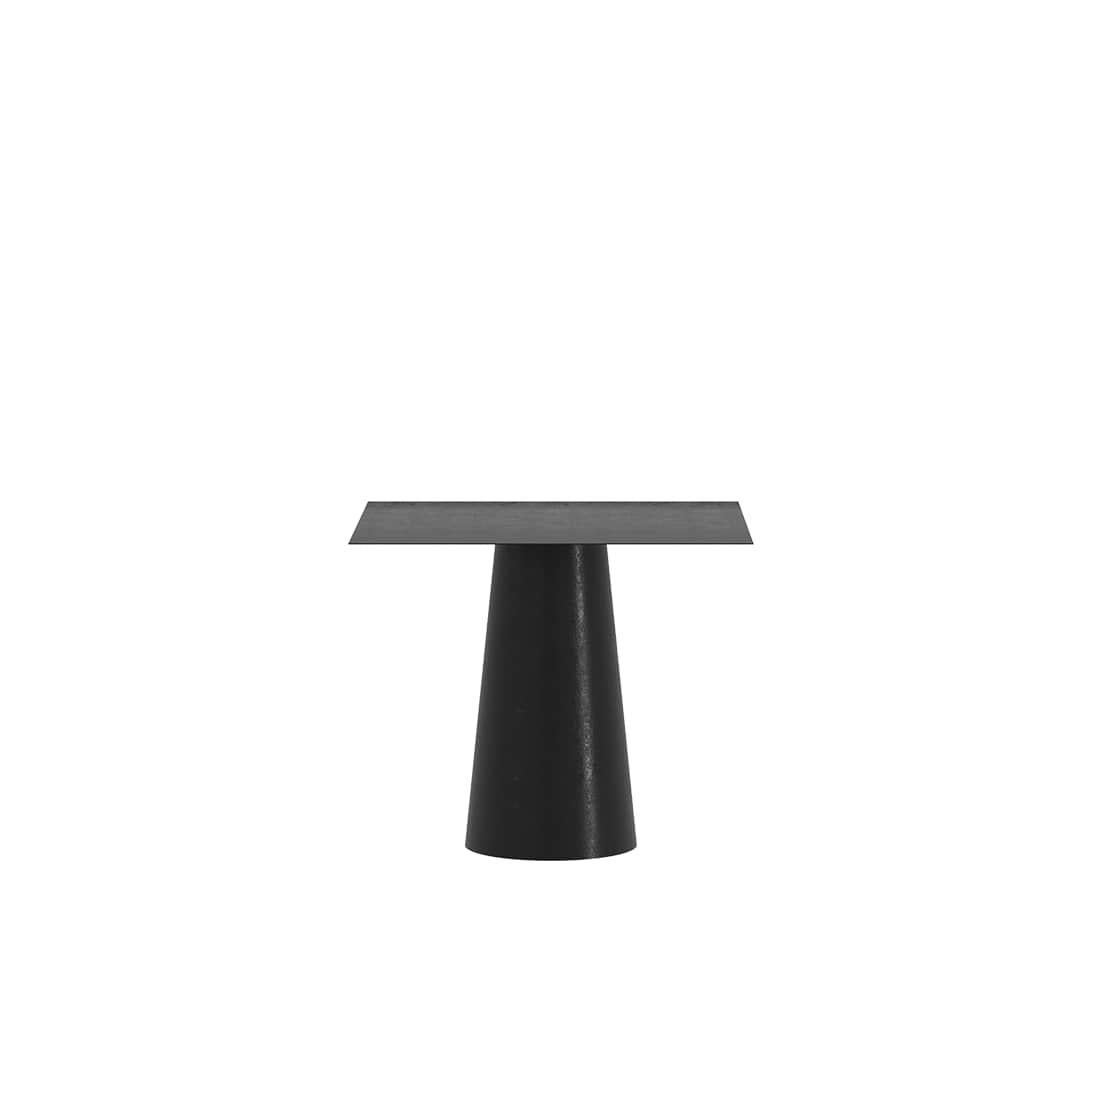 The Conic Square Dining Table is a monolithic piece conceptualized as a dining table suitable for both, indoor and outdoor. 
Crafted by hand in galvanized aluminum and coated with a matte electrostatic finish its diameter can be customized.
With a